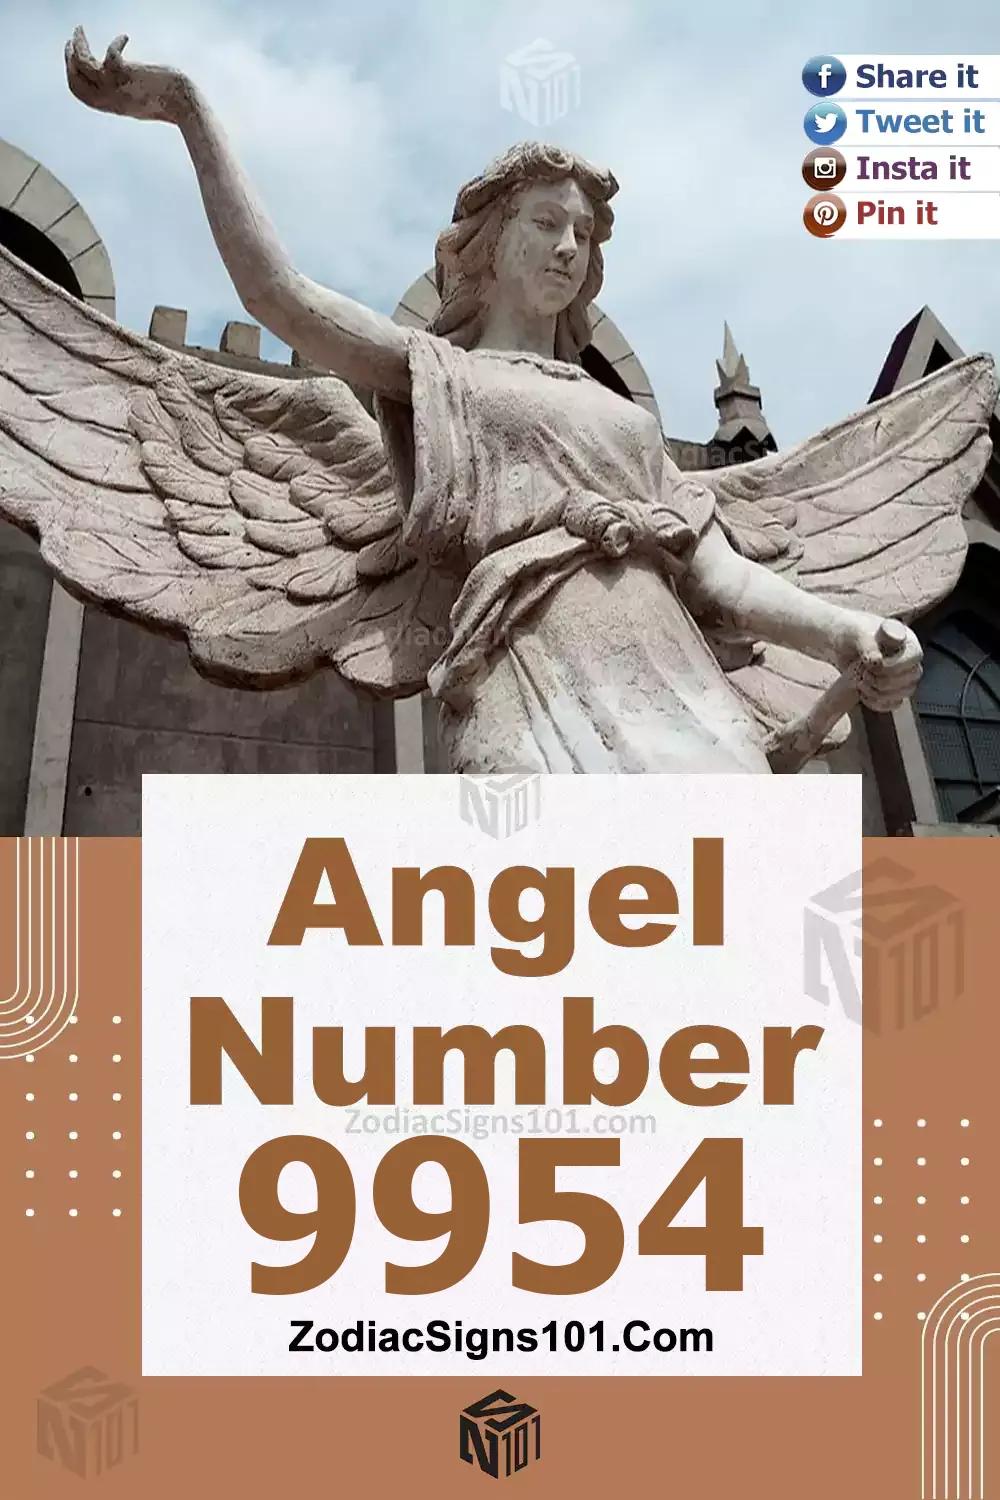 9954 Angel Number Meaning